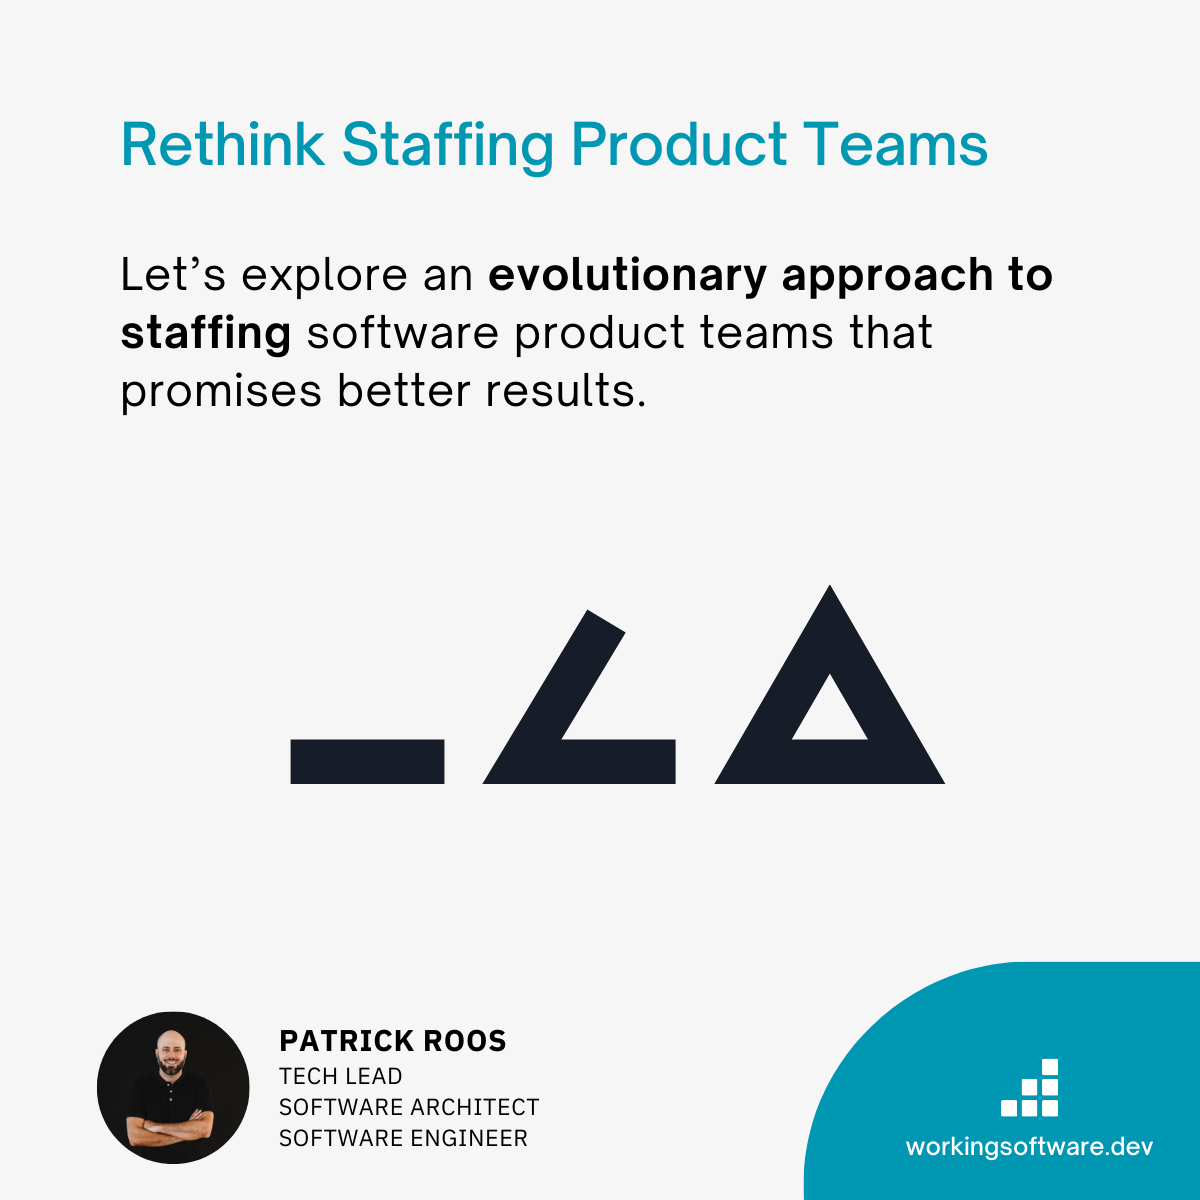 An Evolutionary Approach to Staffing Software Product Teams